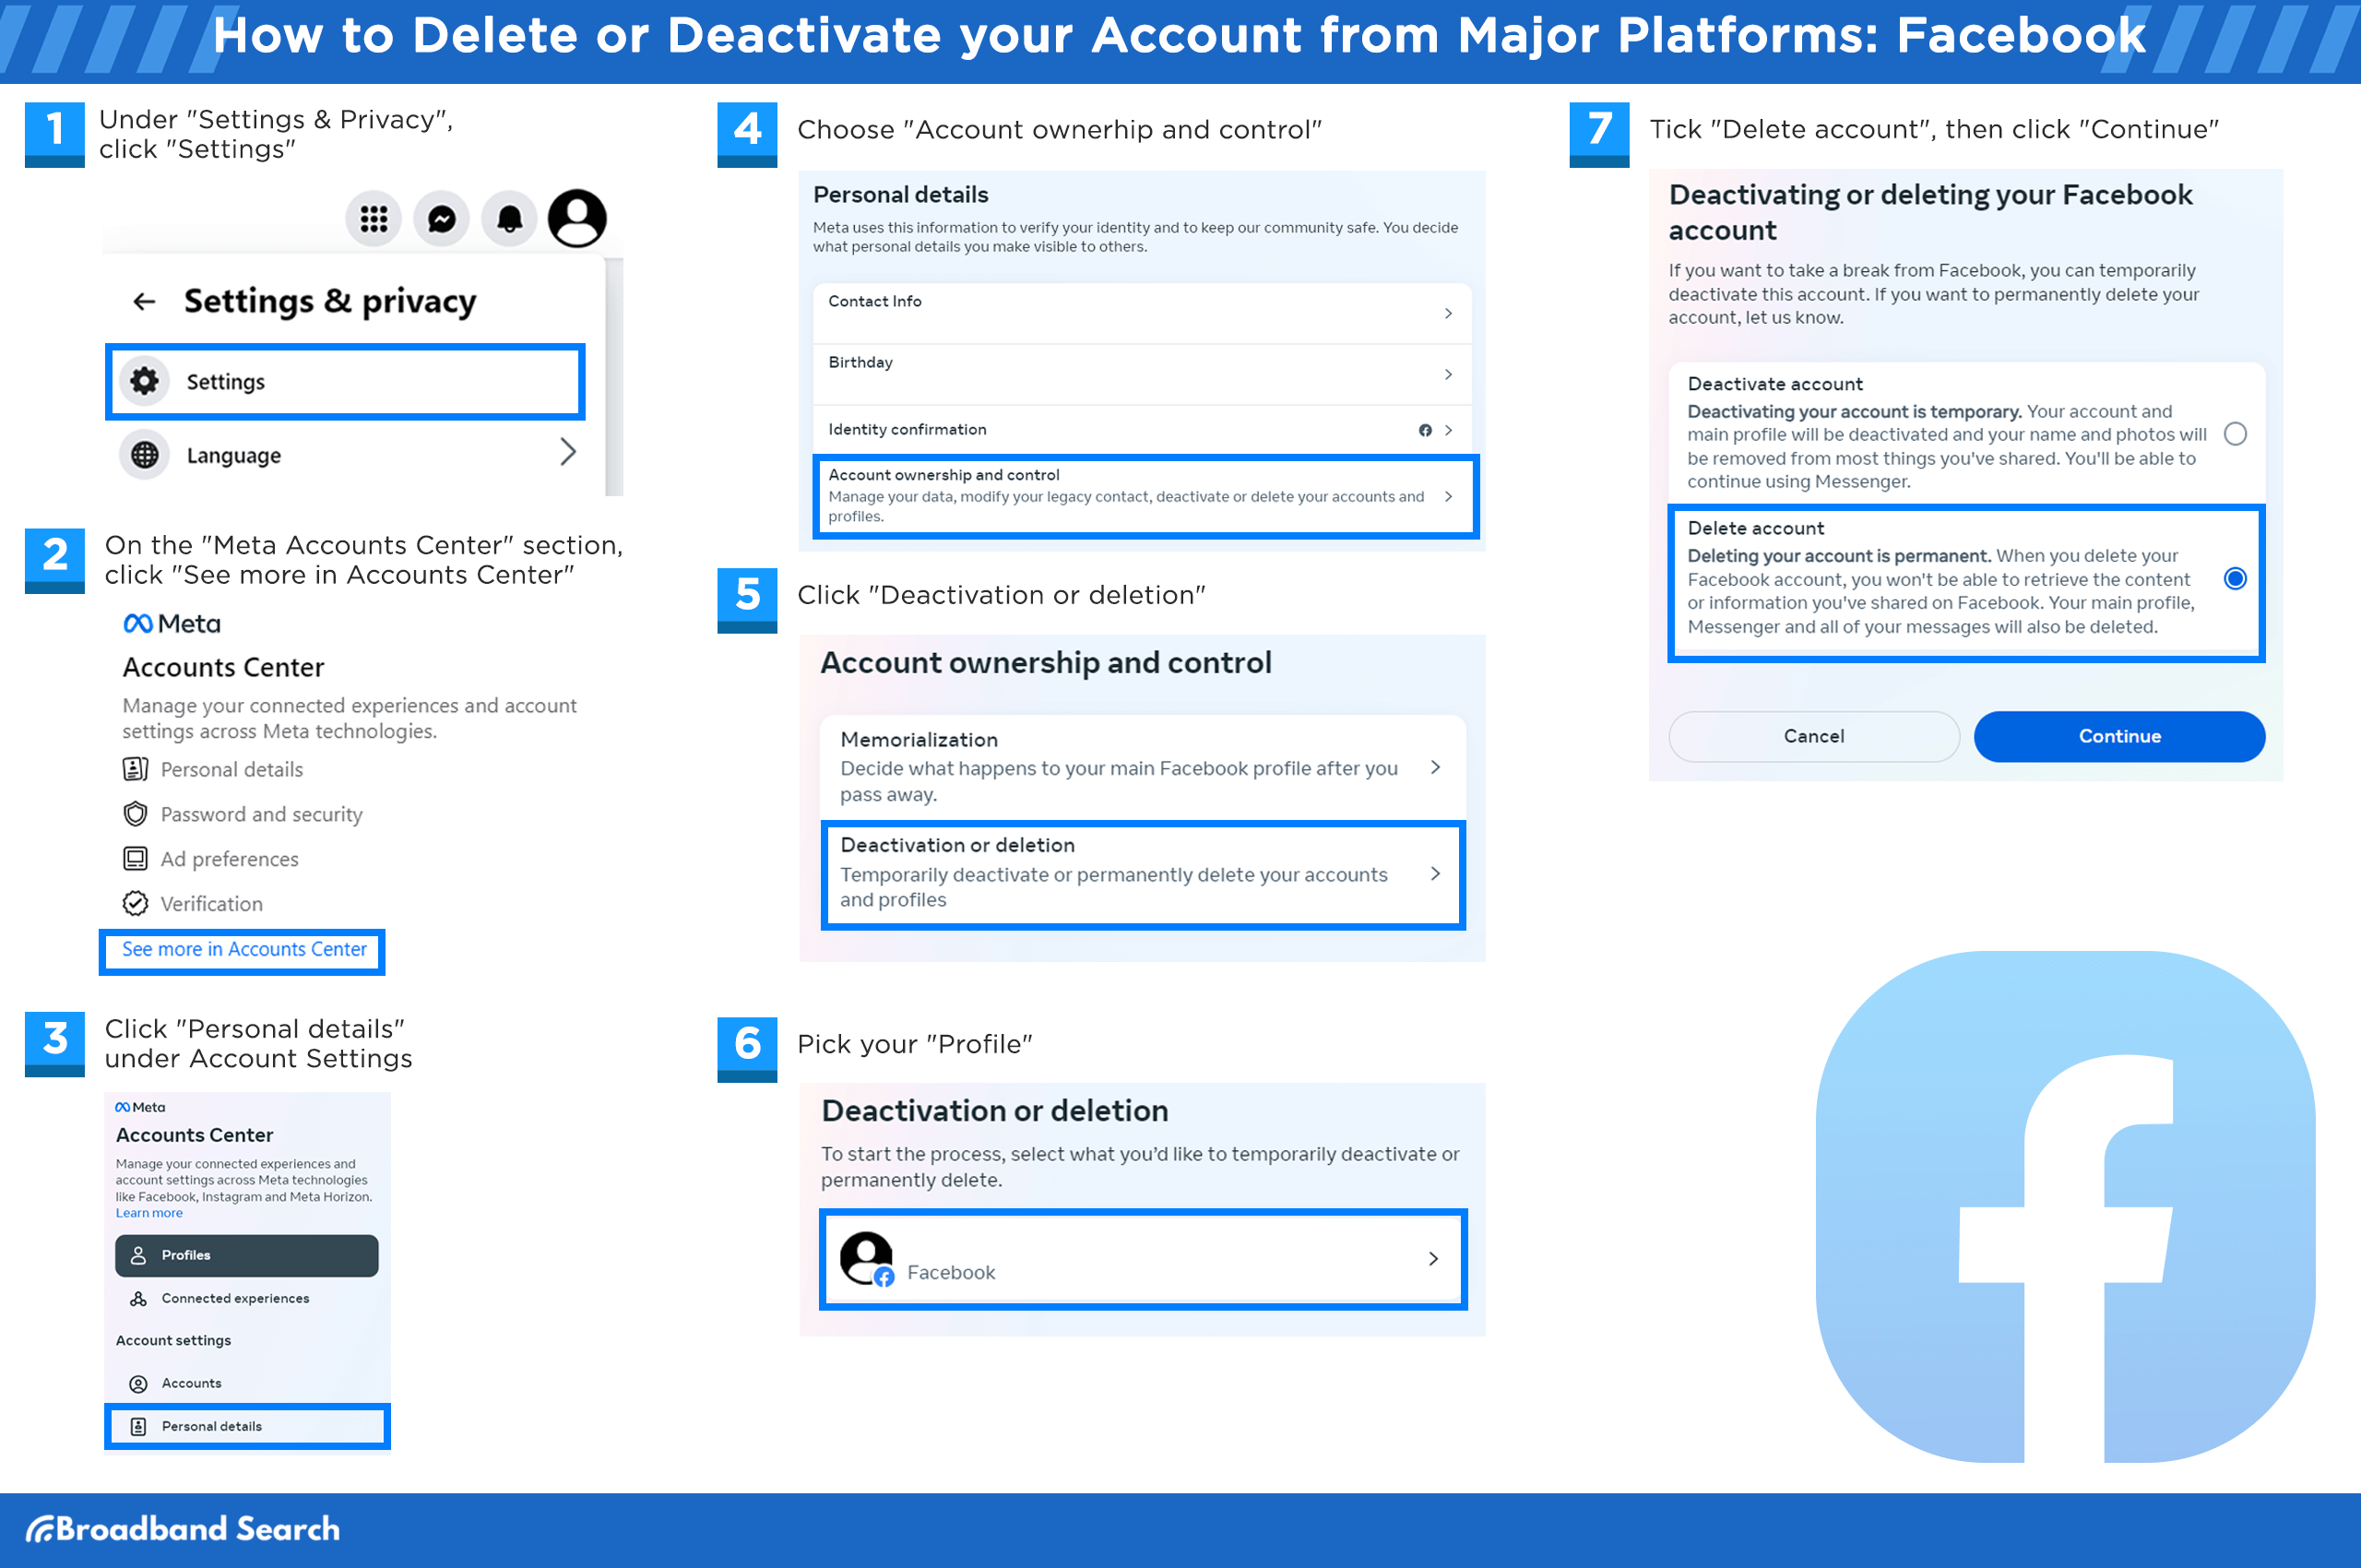 Steps on how to delete or deactivate your account from major platforms like facebook